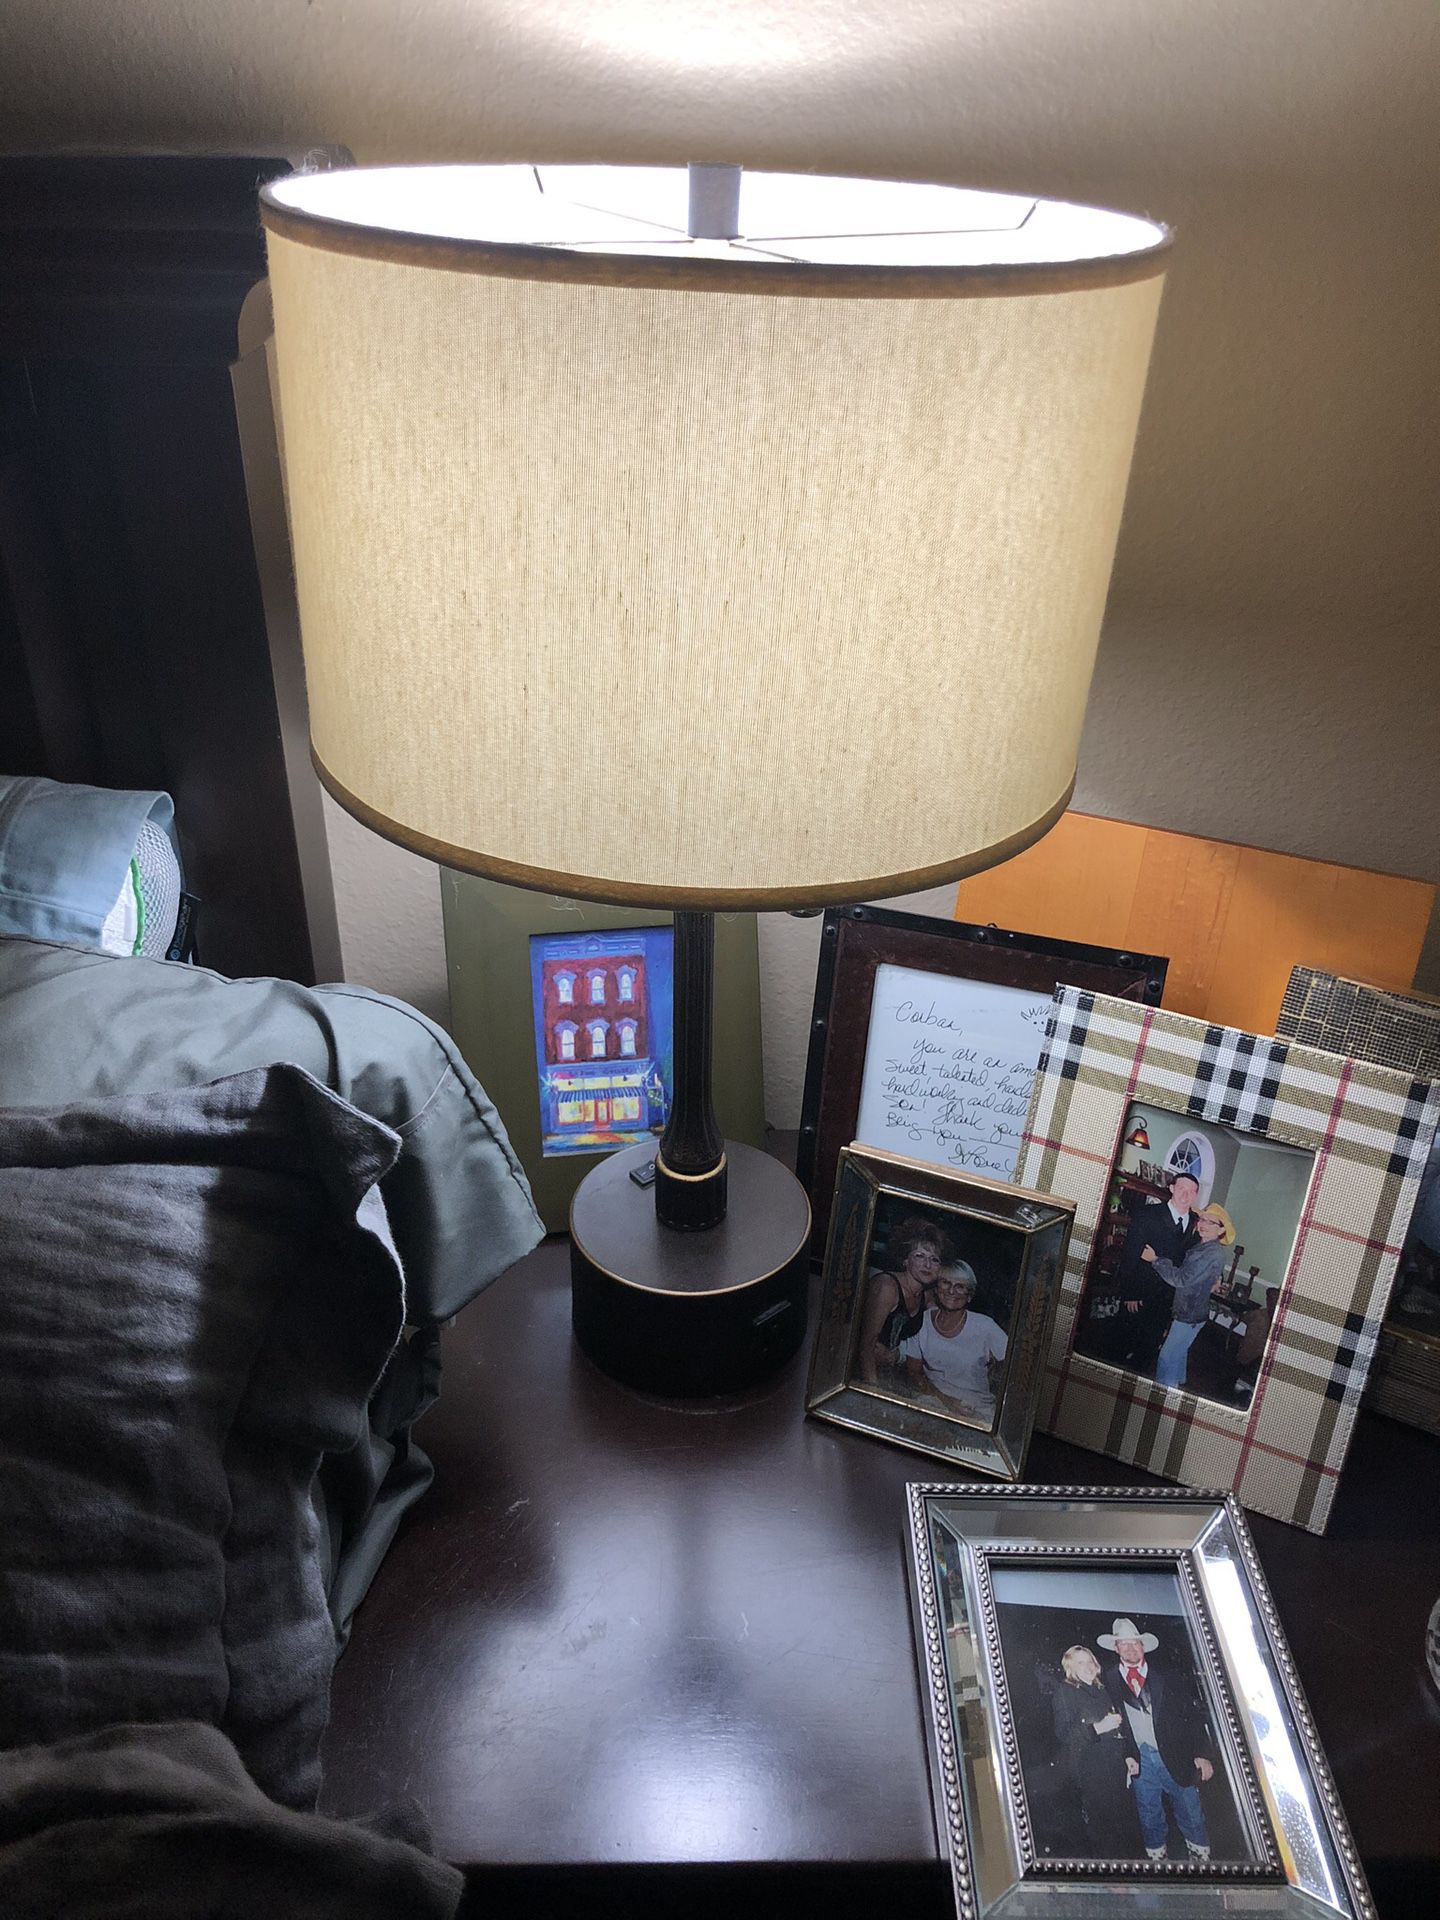 Lamp with electrical outlet and shade/switch too